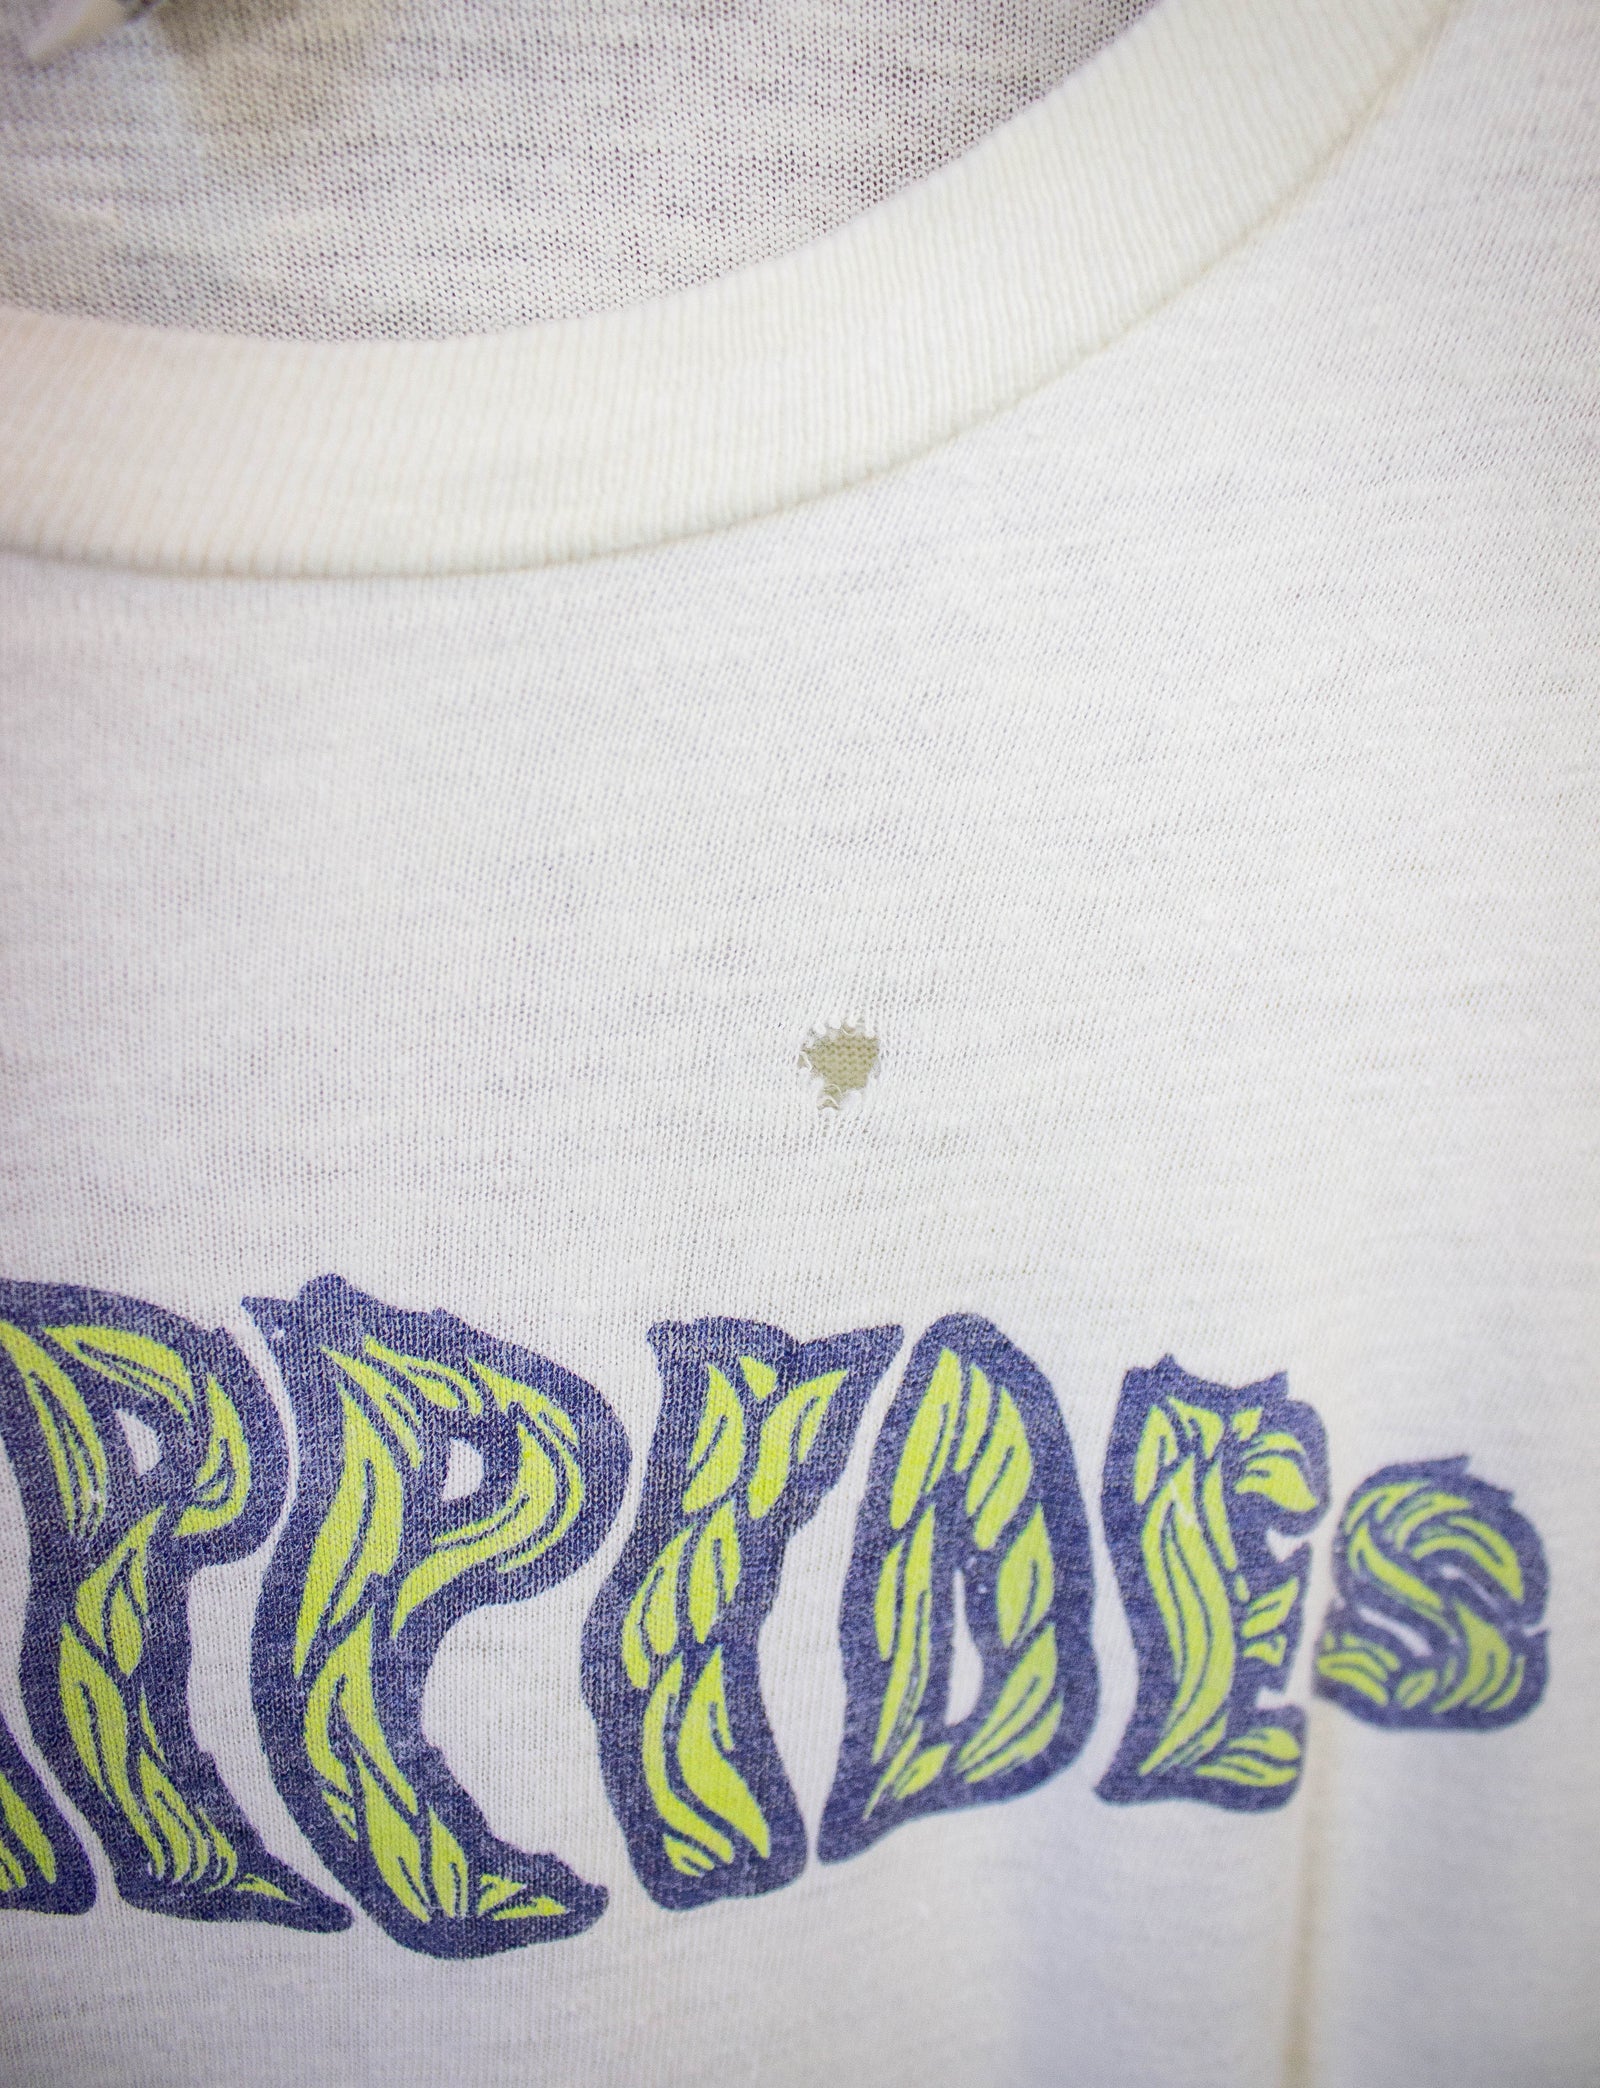 Vintage Phidippides May Run Graphic T Shirt 1978 White Small